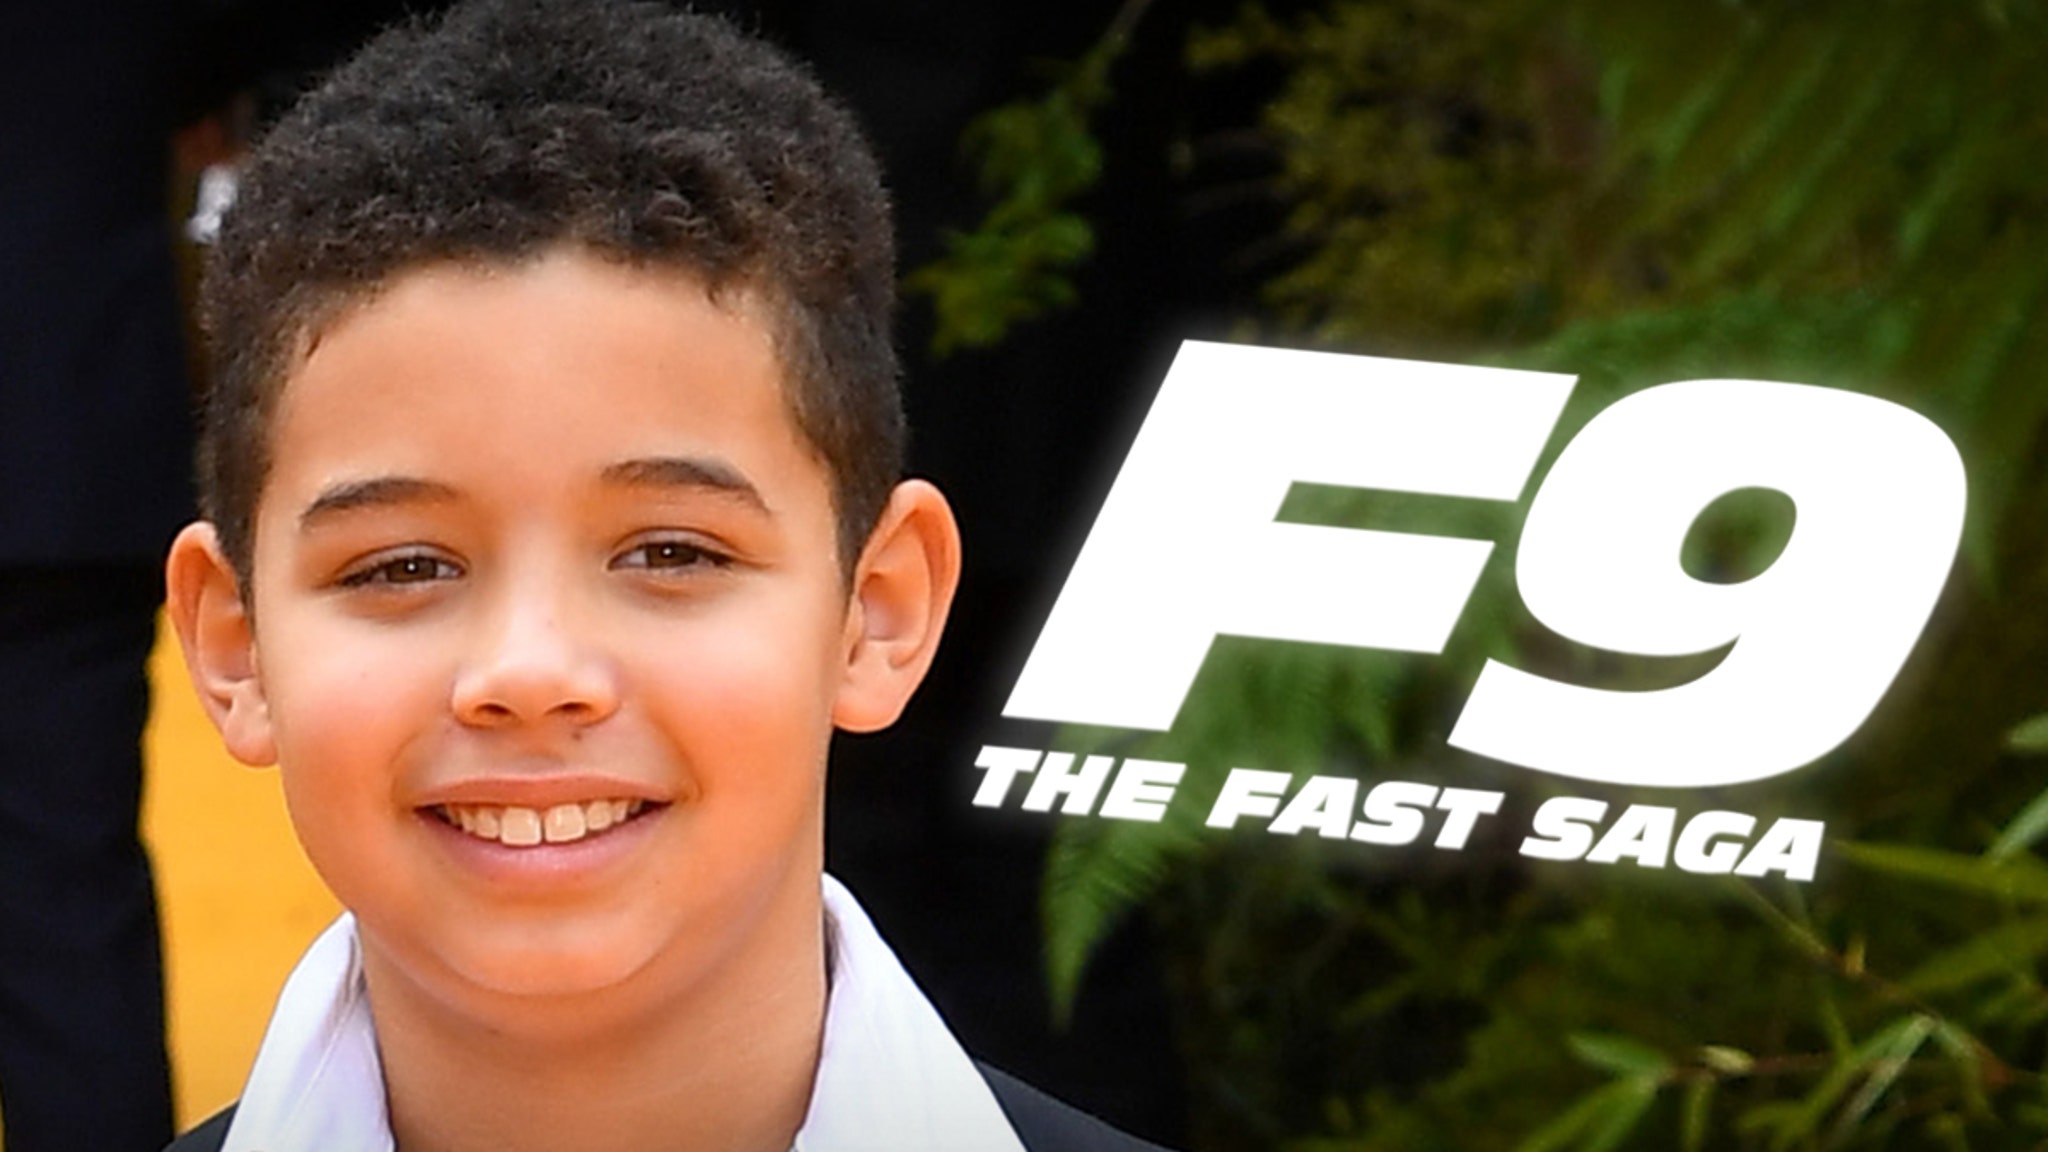 Vin Diesel’s son joins ‘Fast & Furious’ franchise as a younger fool